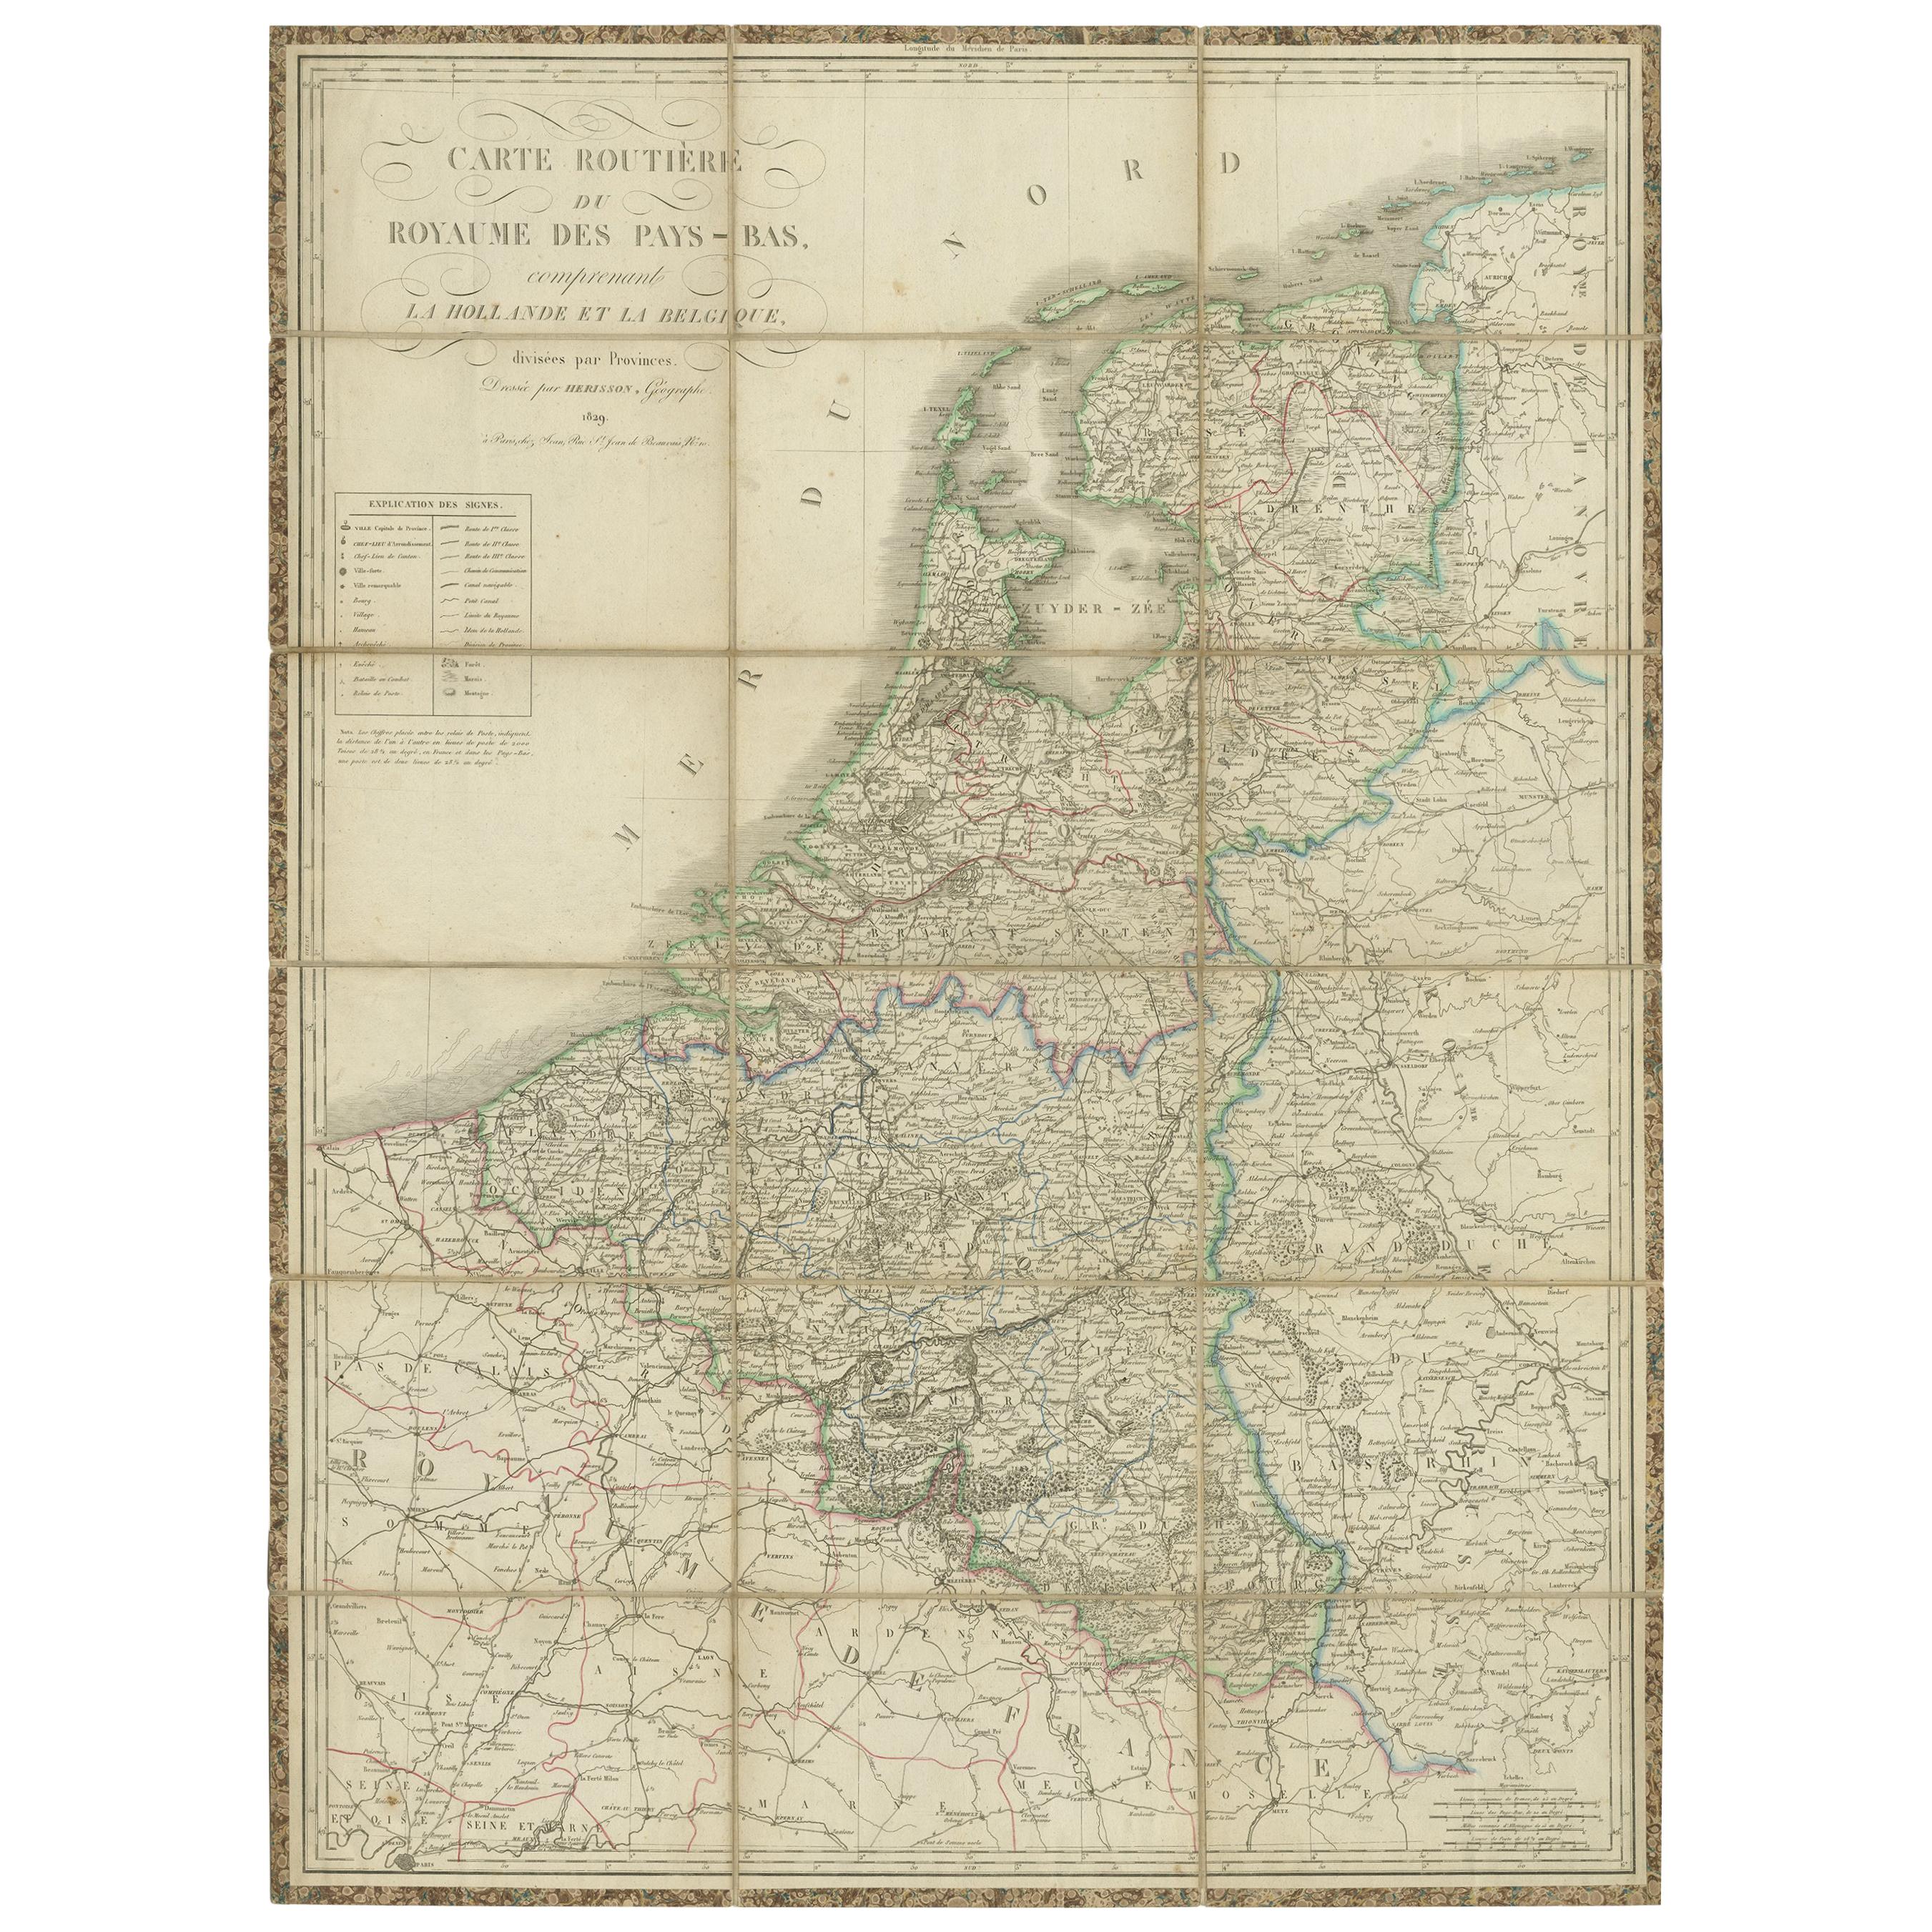 Antique Map of the Netherlands and Belgium by Hérisson, 1829